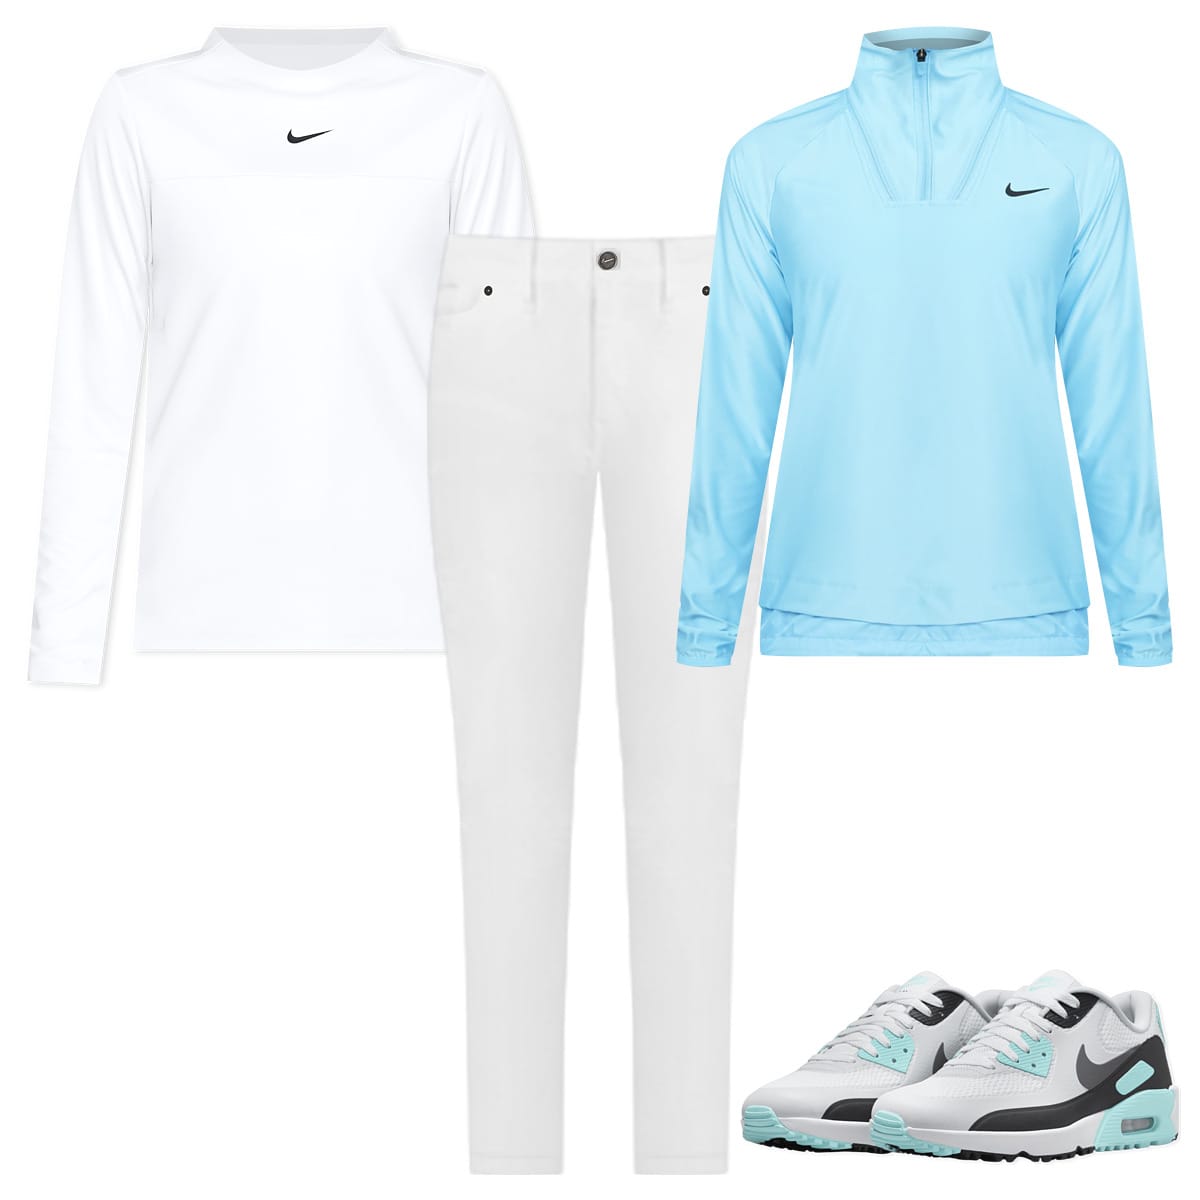 CUTE GOLF OUTFITS FOR WOMEN - Chic Over 50